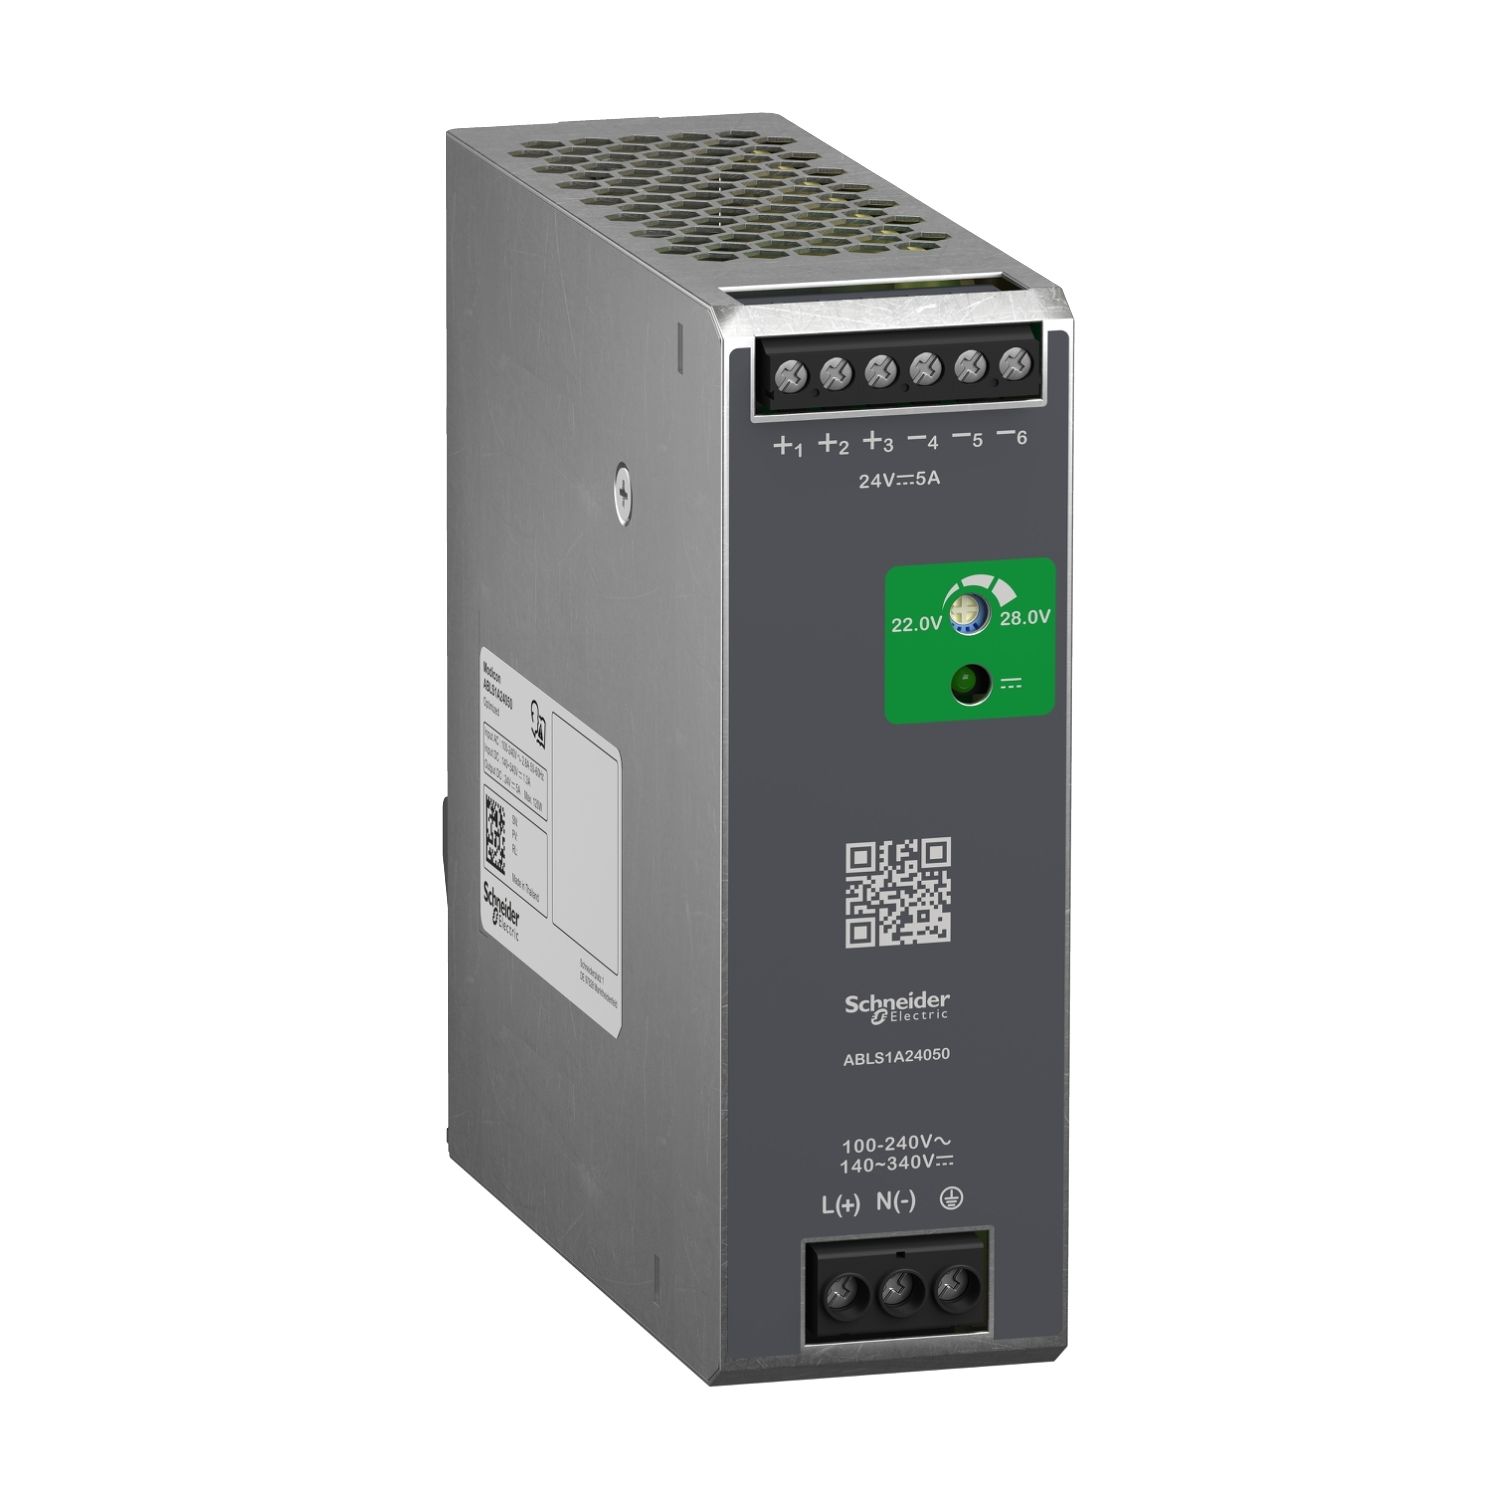 ABLS1A24050 Regulated Power Supply, 100...240V AC, 24V, 5A, single phase, Optimized